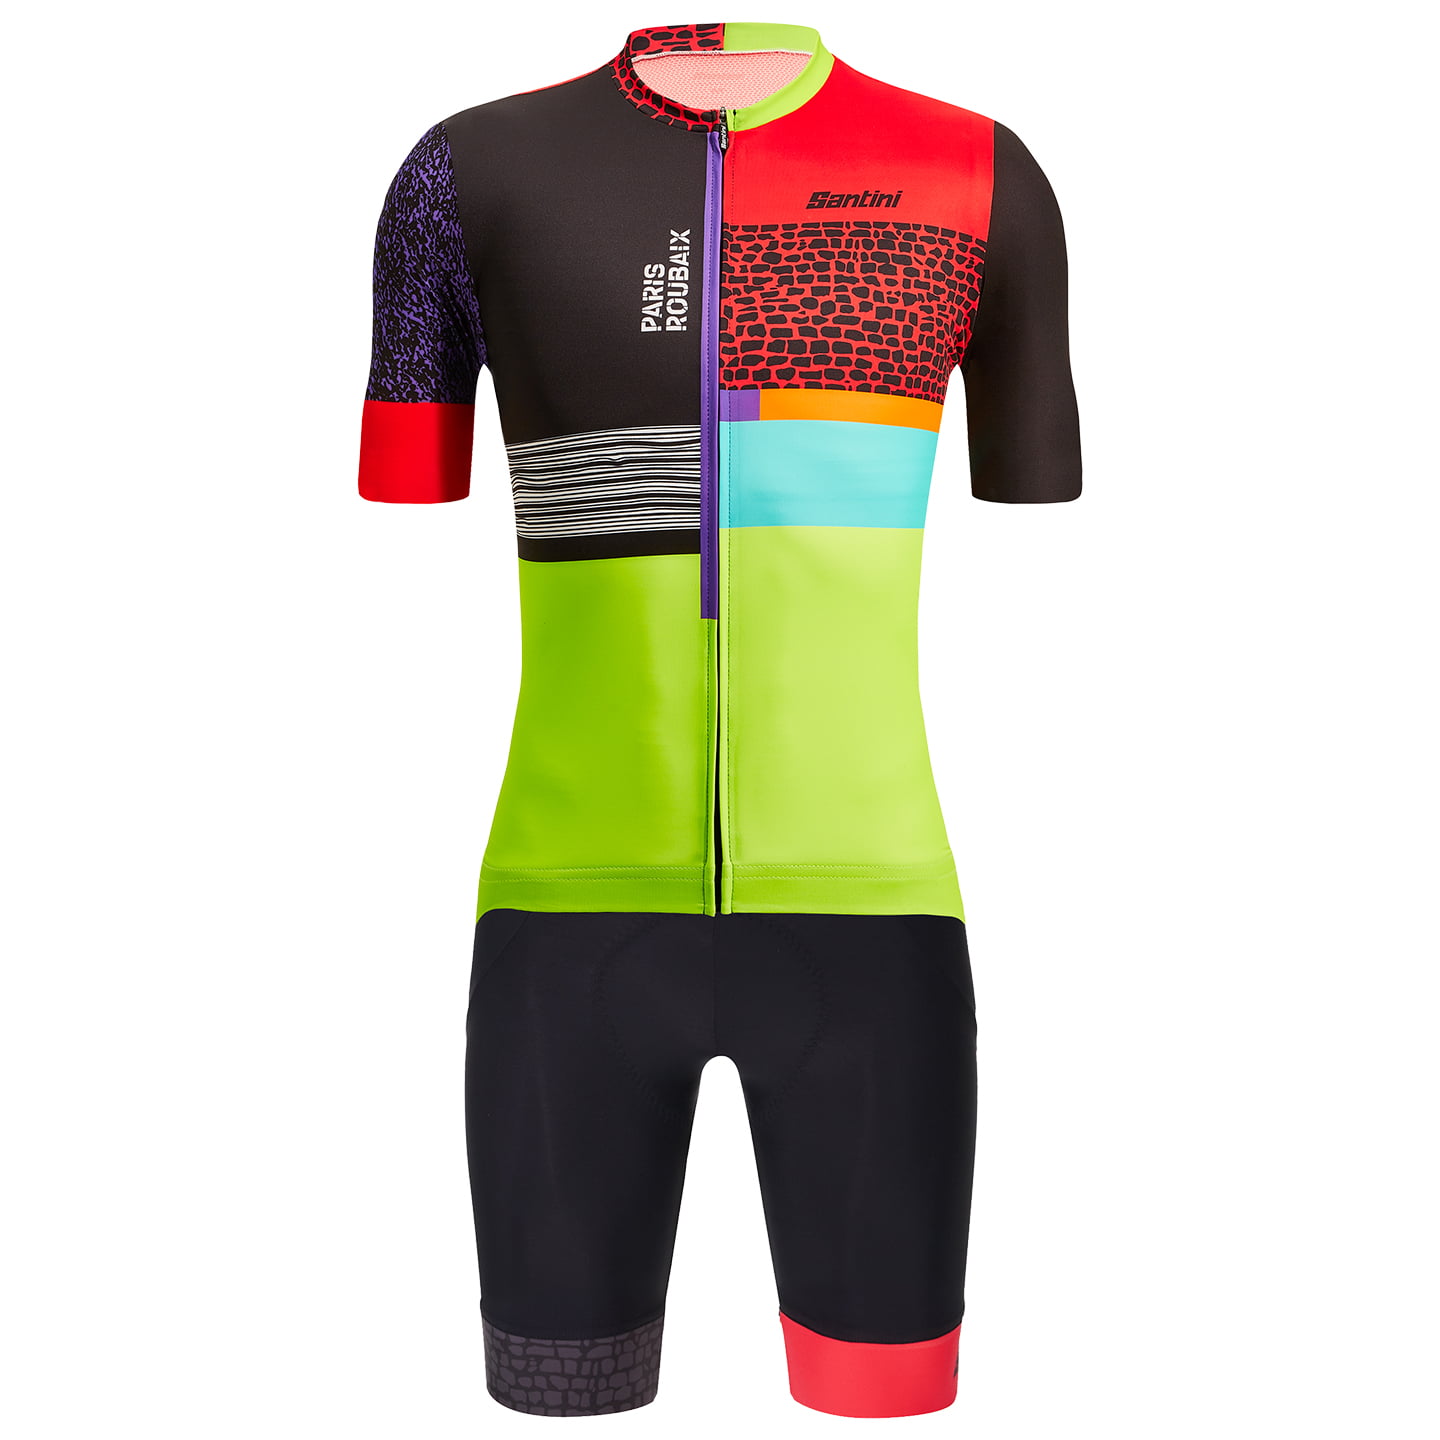 SANTINI Paris- Roubaix FORGER DES HEROES 23 Set (cycling jersey + cycling shorts) Set (2 pieces), for men, Cycling clothing